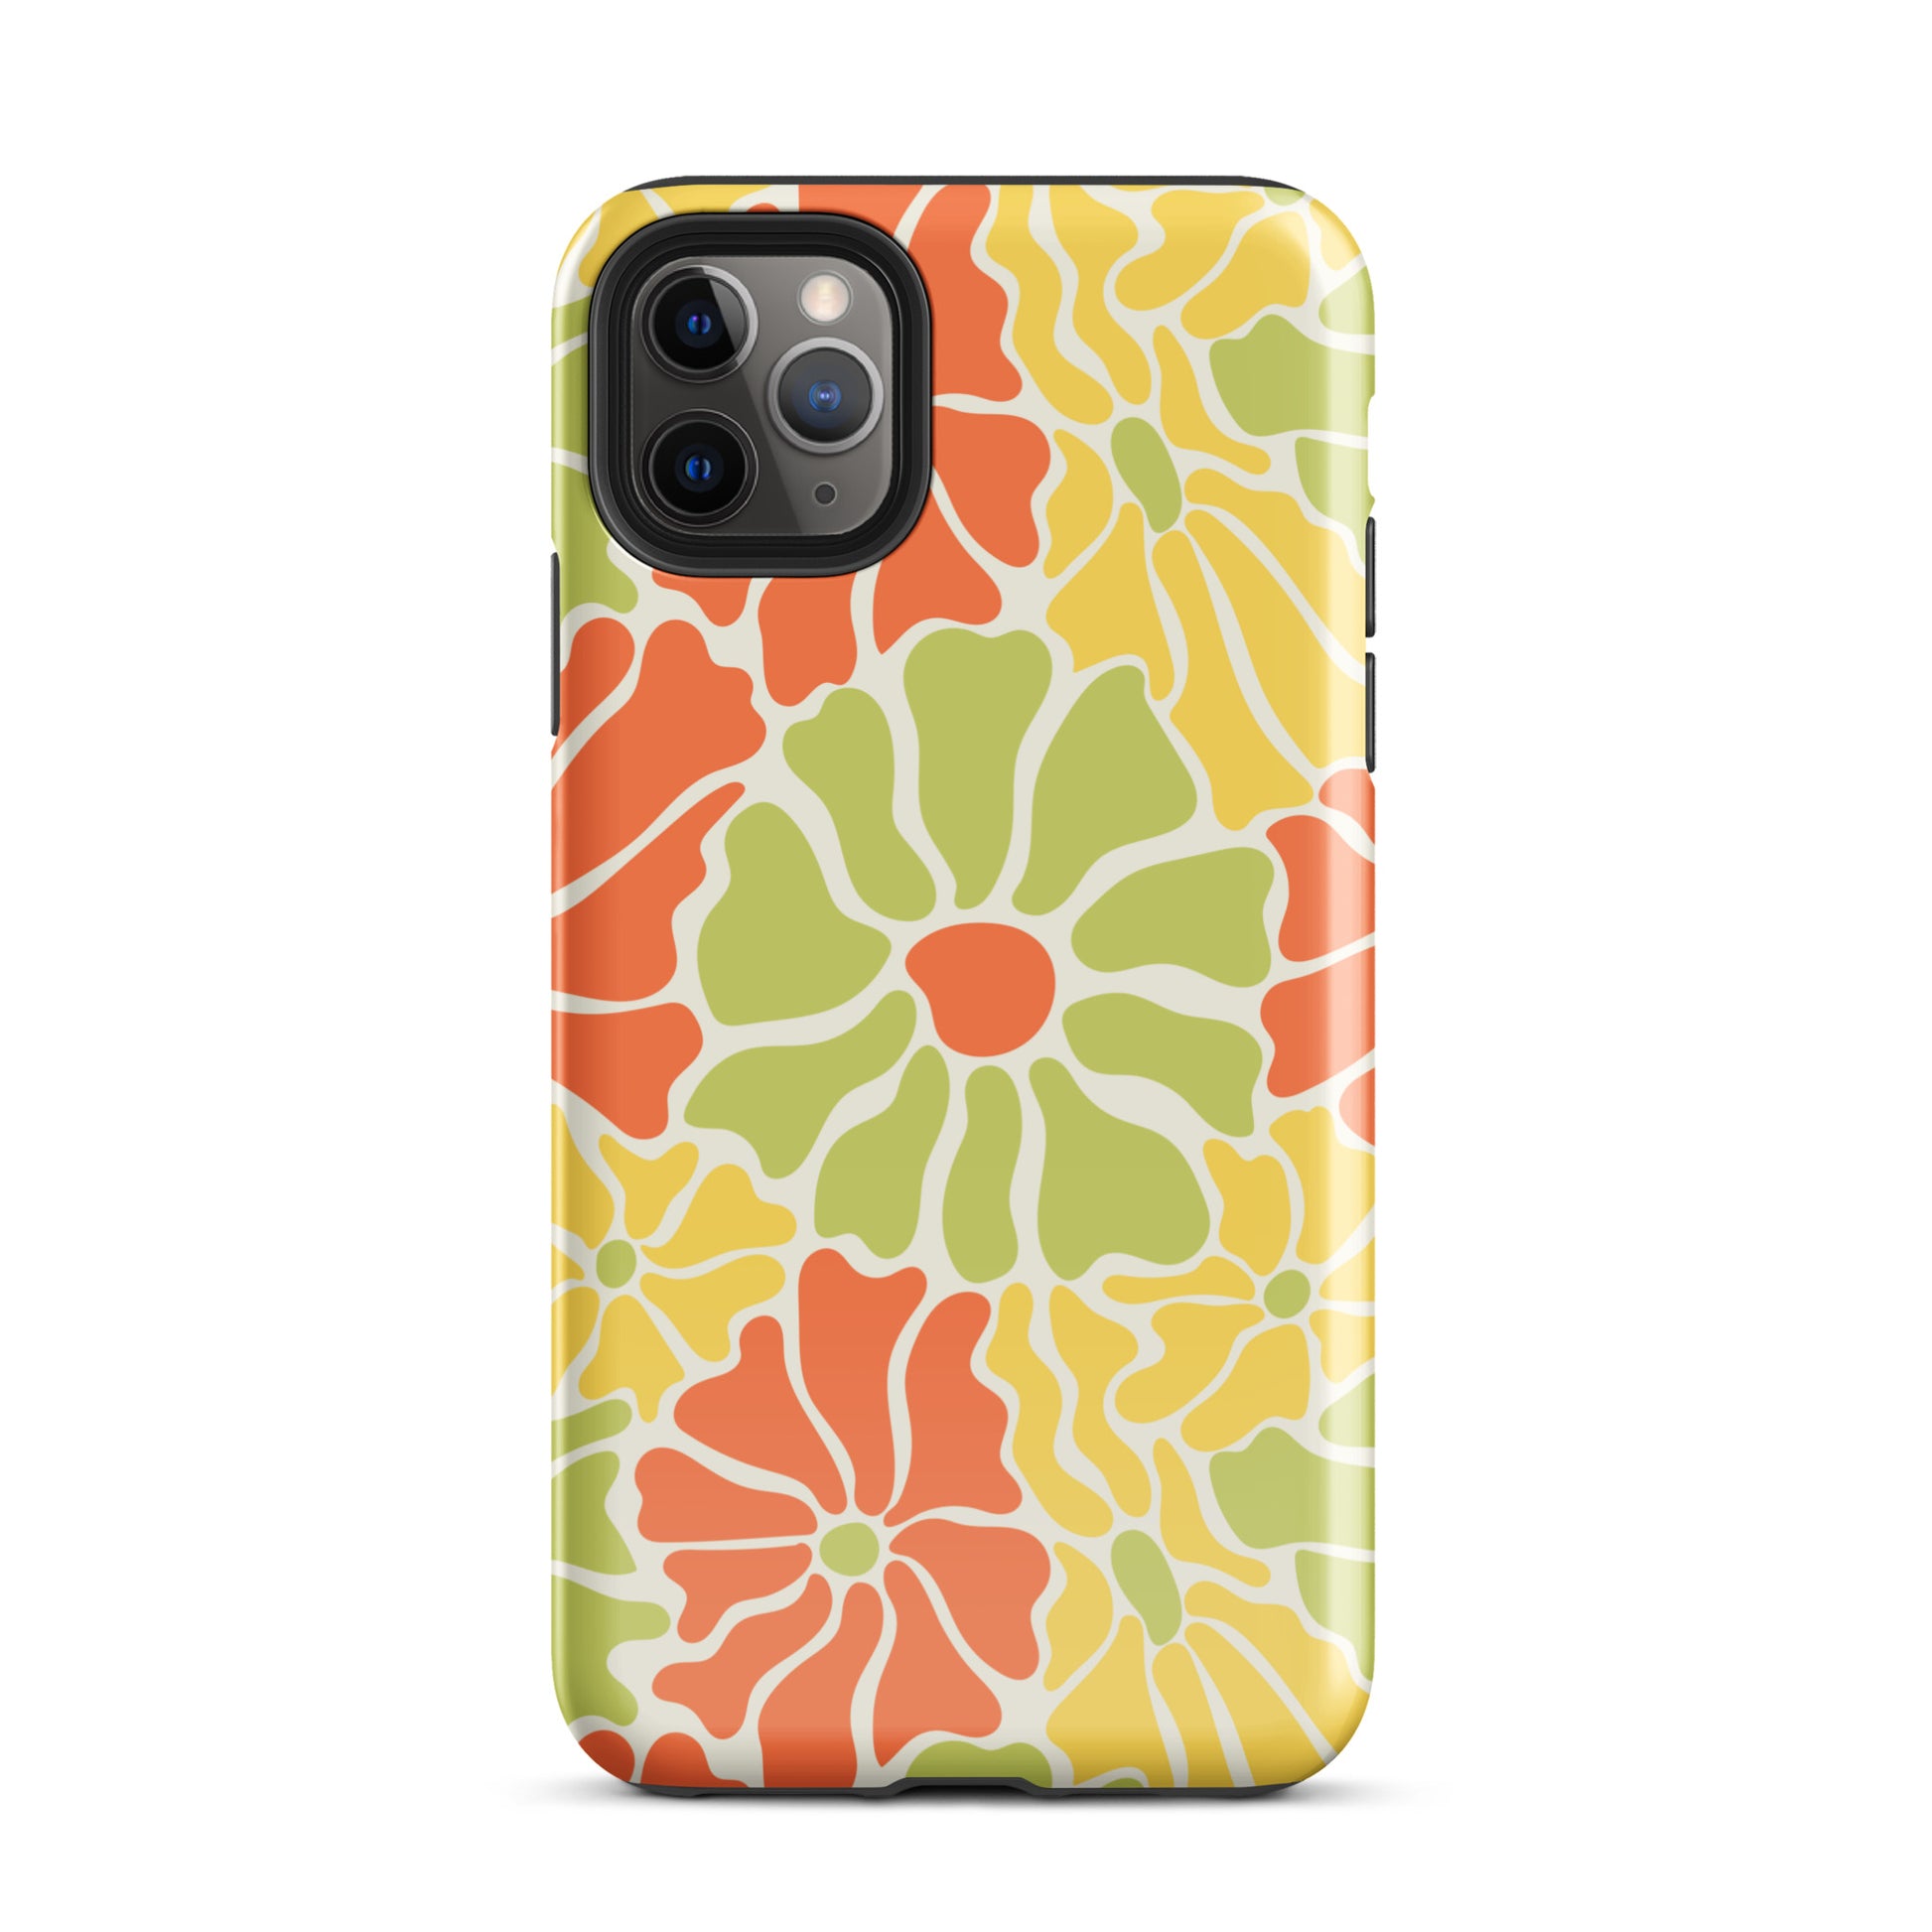 Sun Patch iPhone Case iPhone 11 Pro Max Glossy